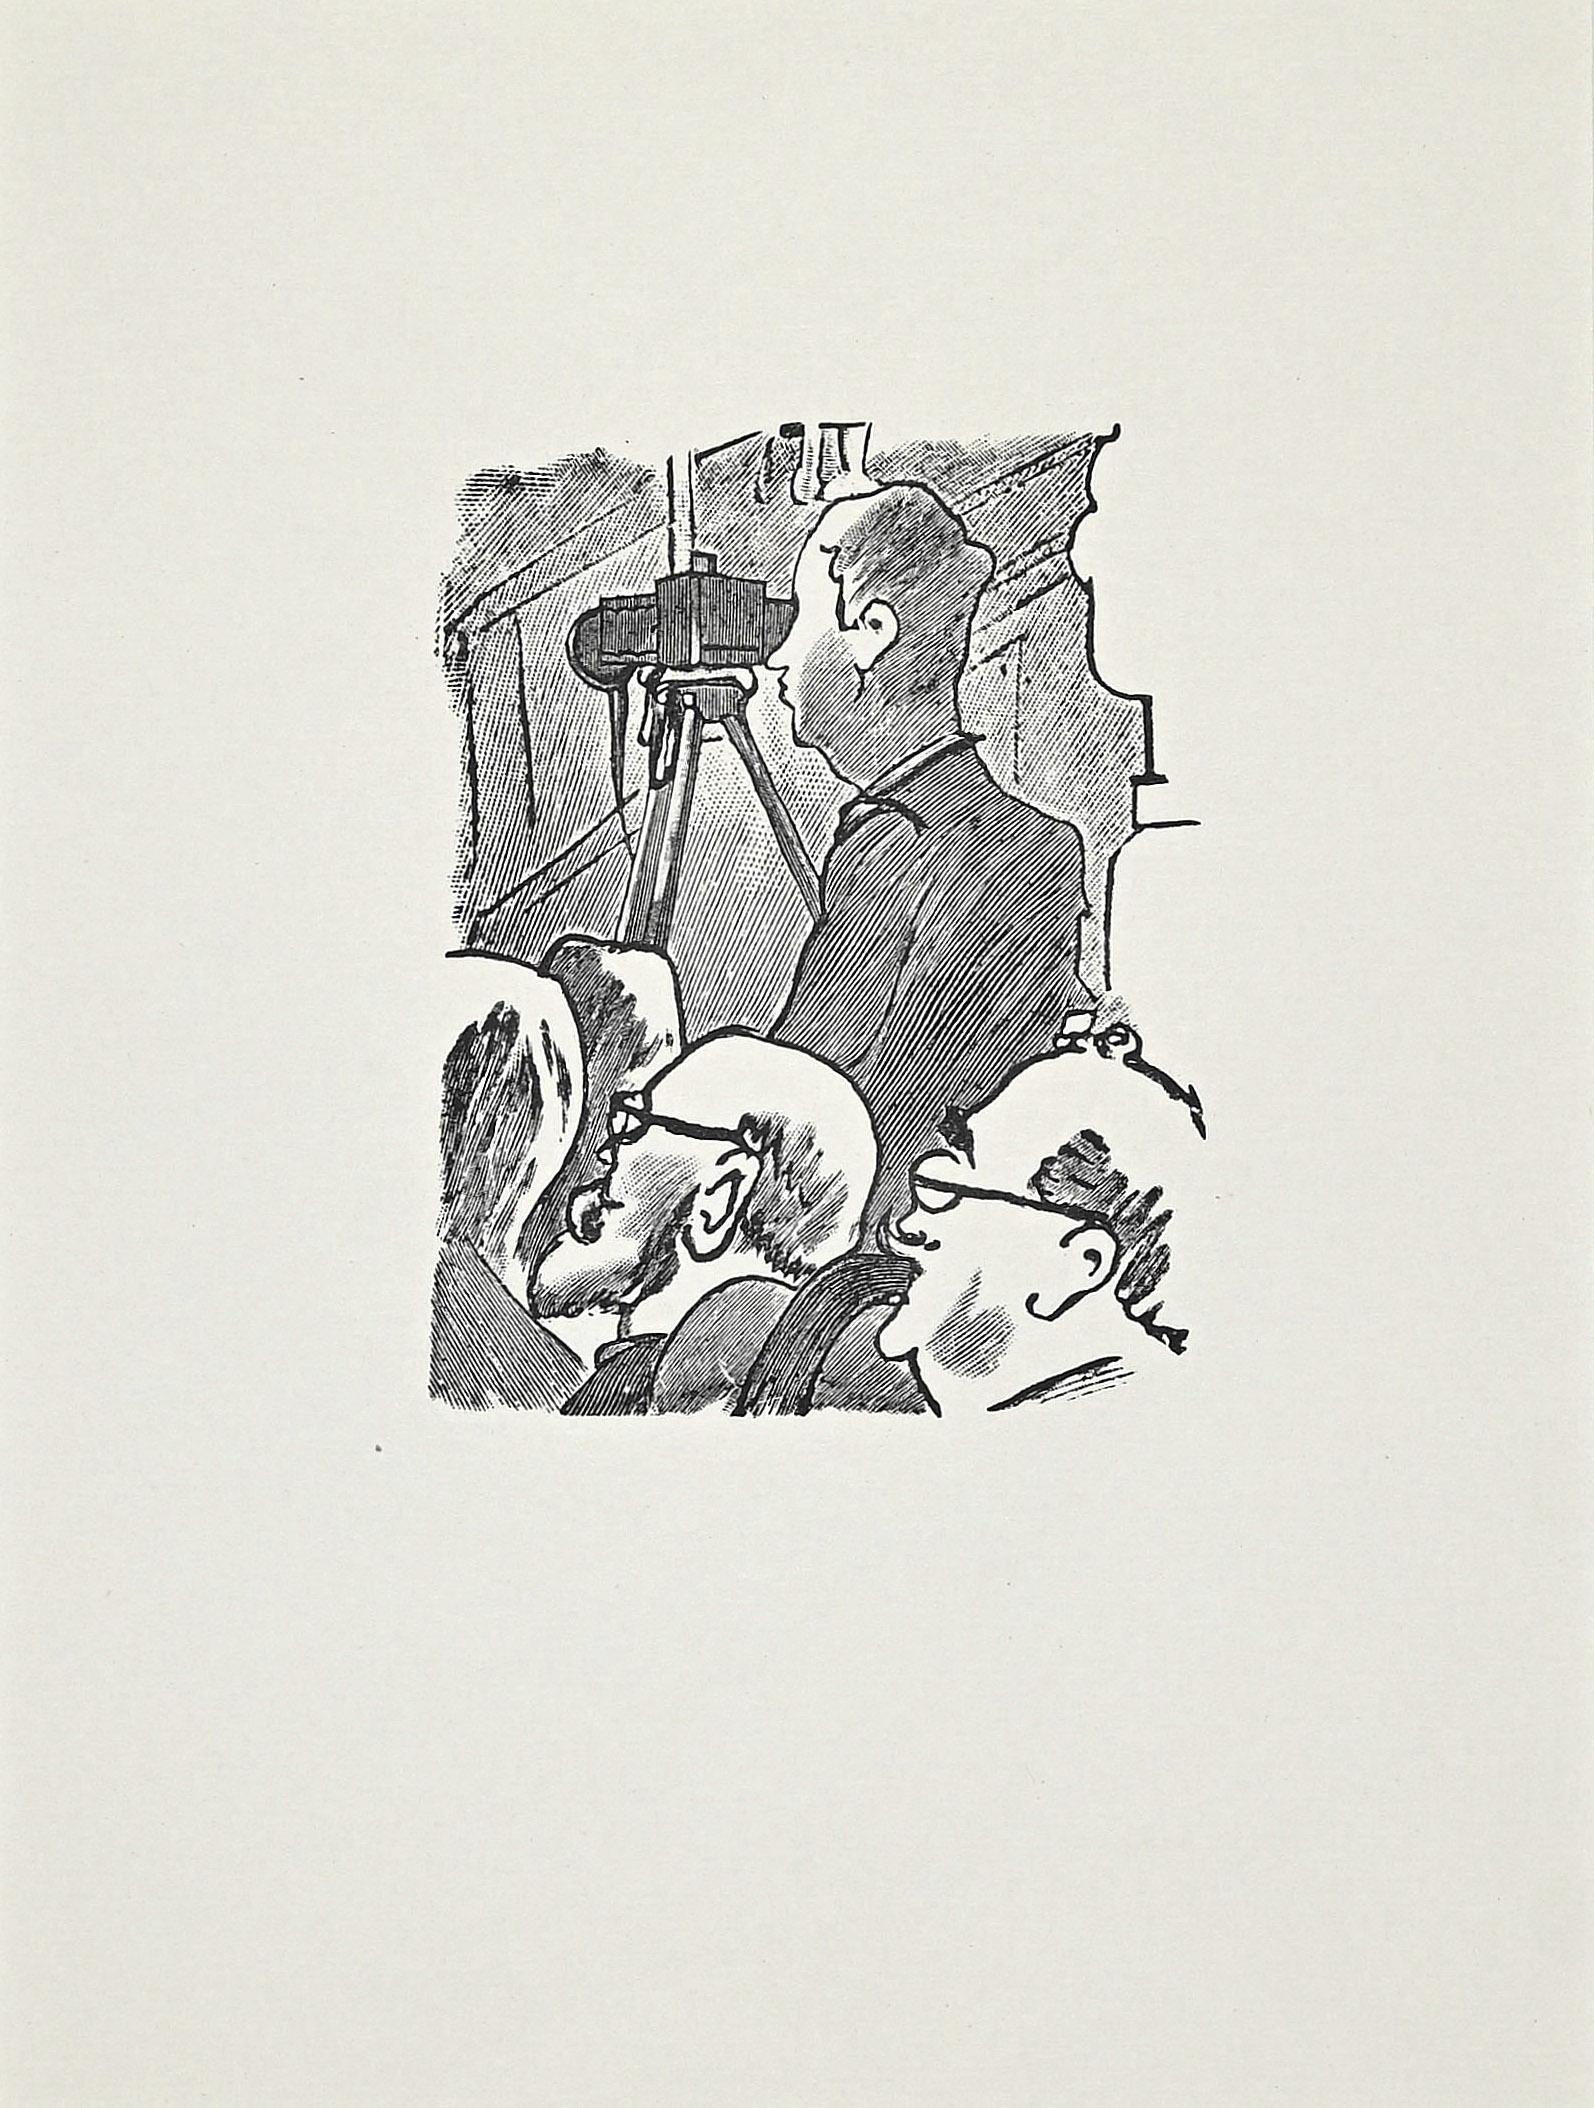 The Projection is an original woodcut realized by Ernesto Romagnoli in 1963.

No signature, in very good conditions, mounted on a white cardboard (49 x 34 cm).

The artwork is d'après Mino Maccari.